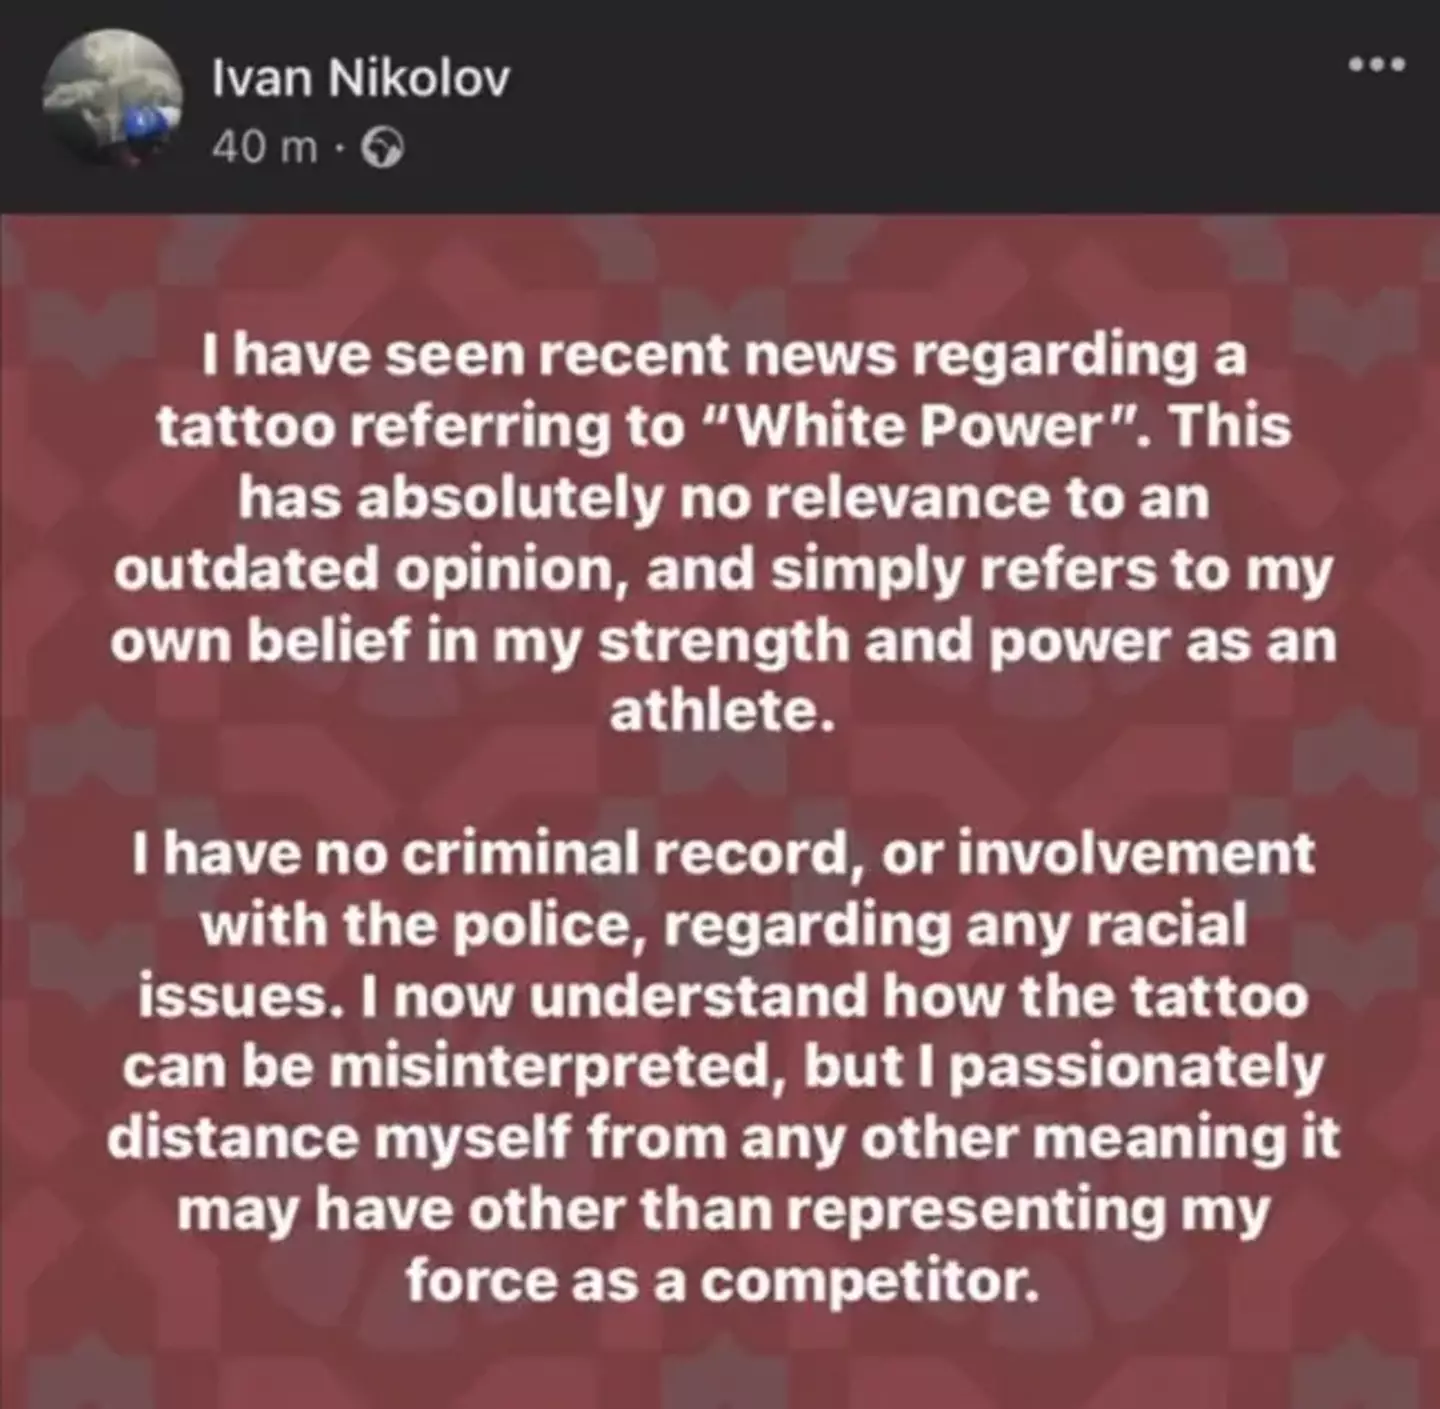 Ivan Nikolov appeared to respond to the backlash about his tattoos.